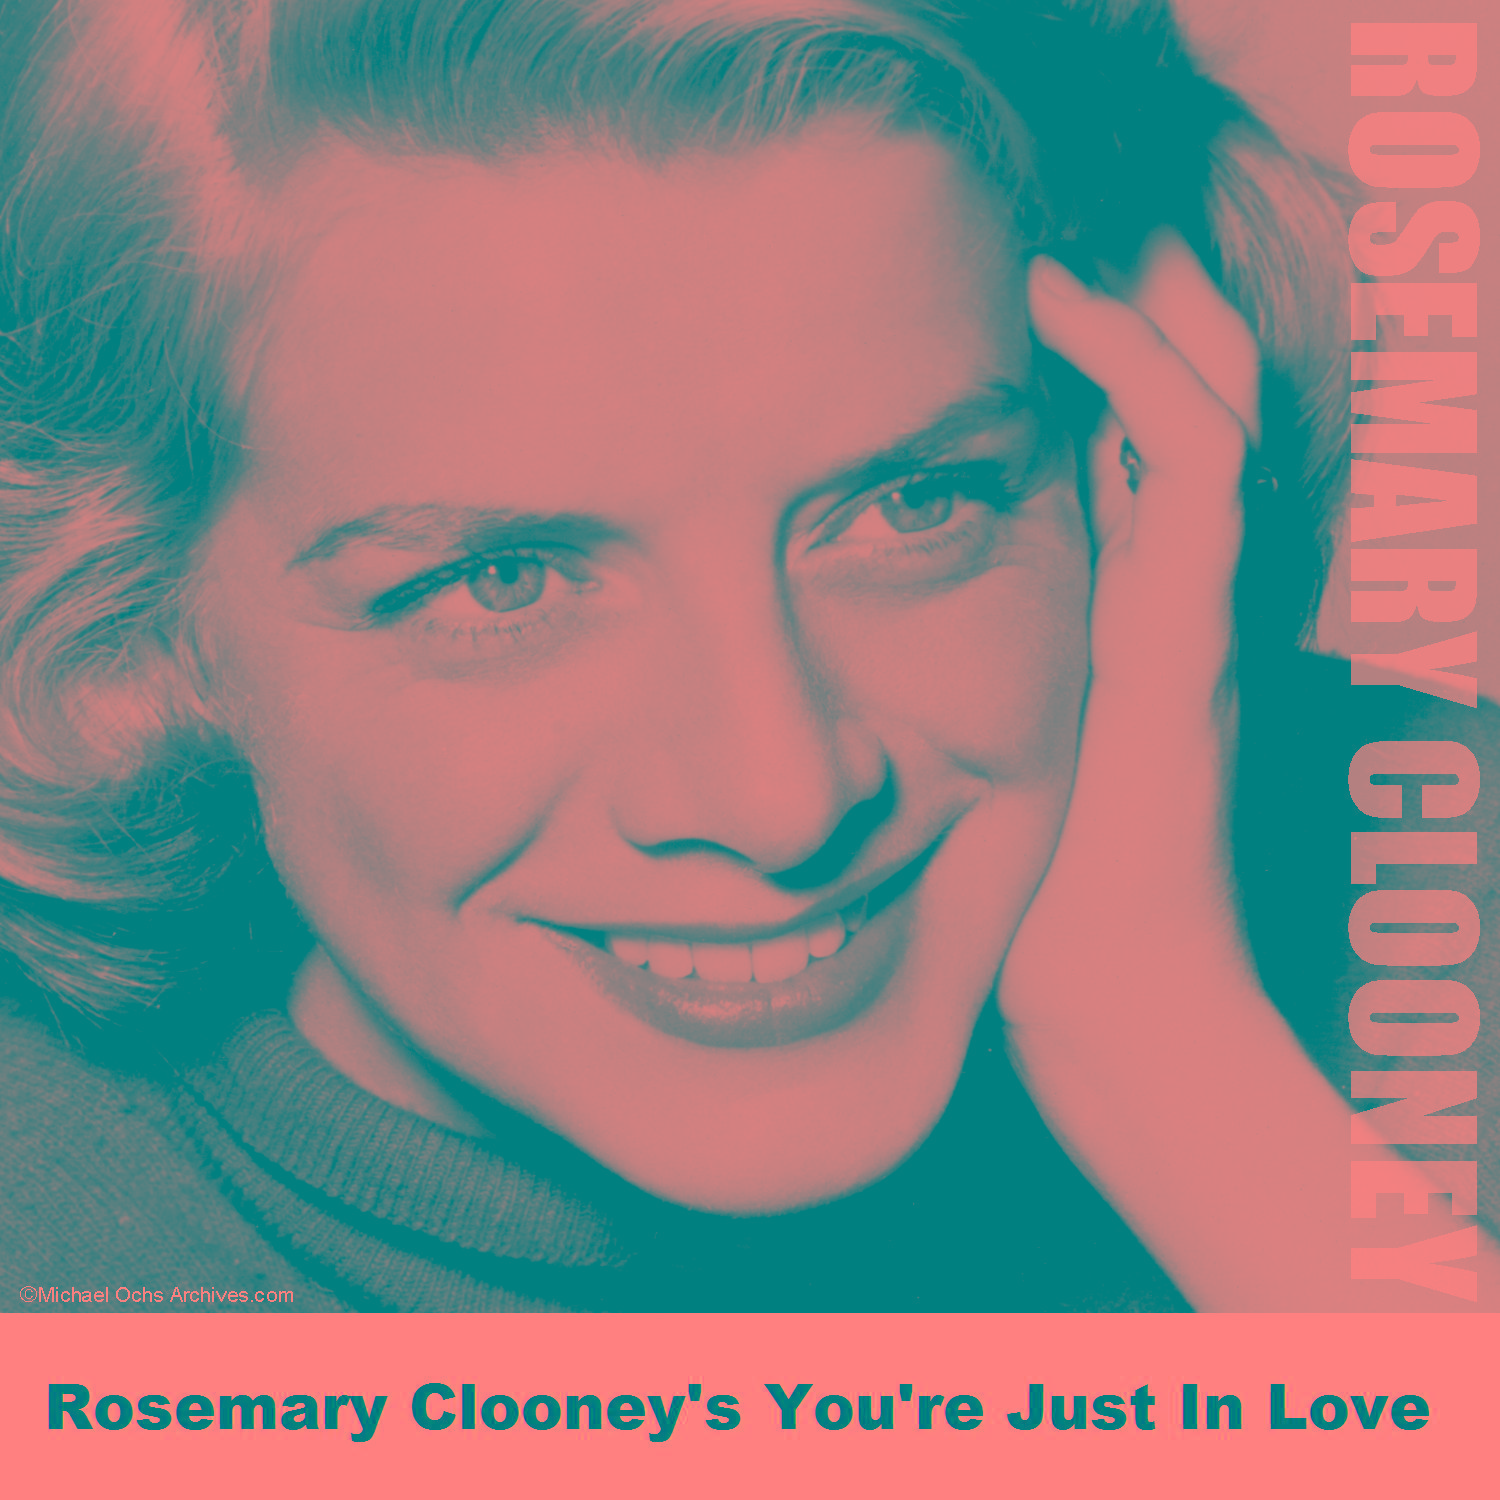 Rosemary Clooney's You're Just In Love